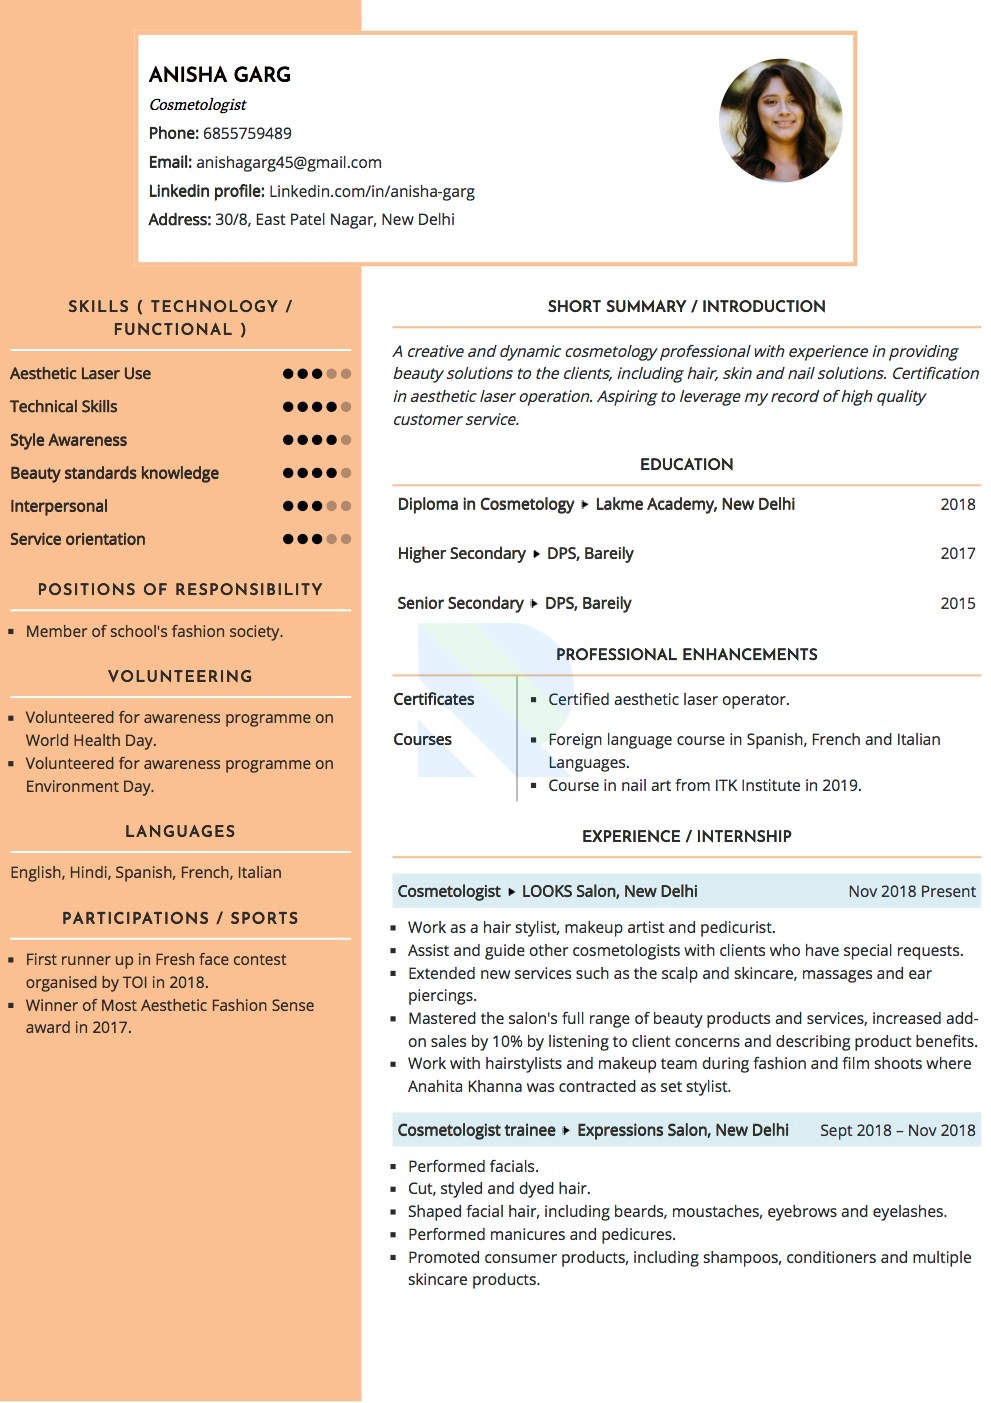 Sample Resume of Cosmetologist | Free Resume Templates & Samples on Resumod.co